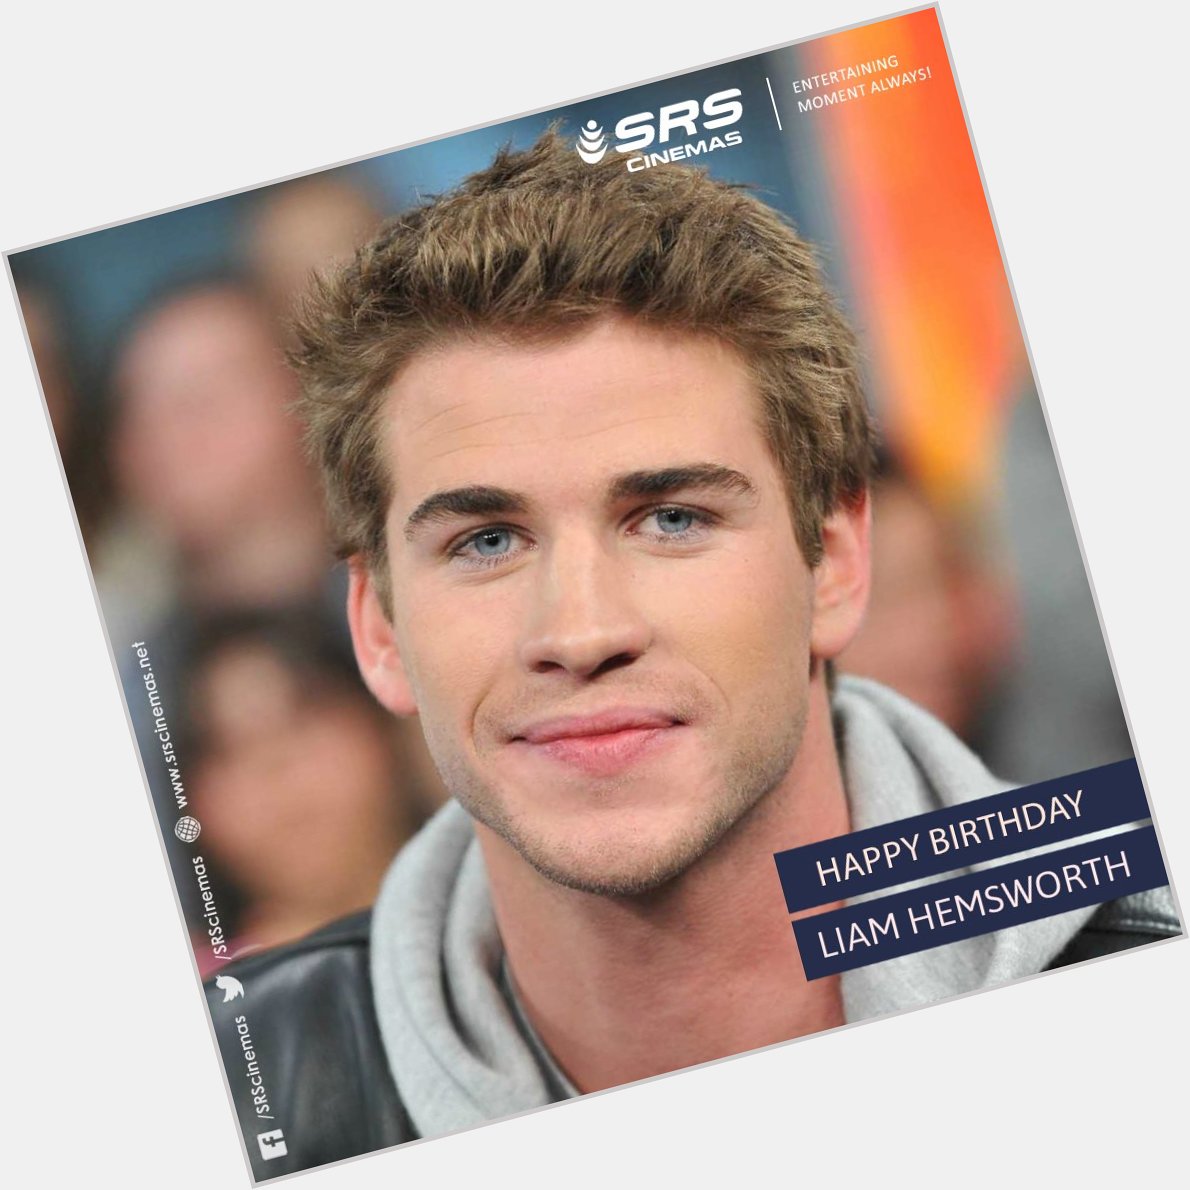 Wishing Liam Hemsworth a very happy birthday from all of us at 